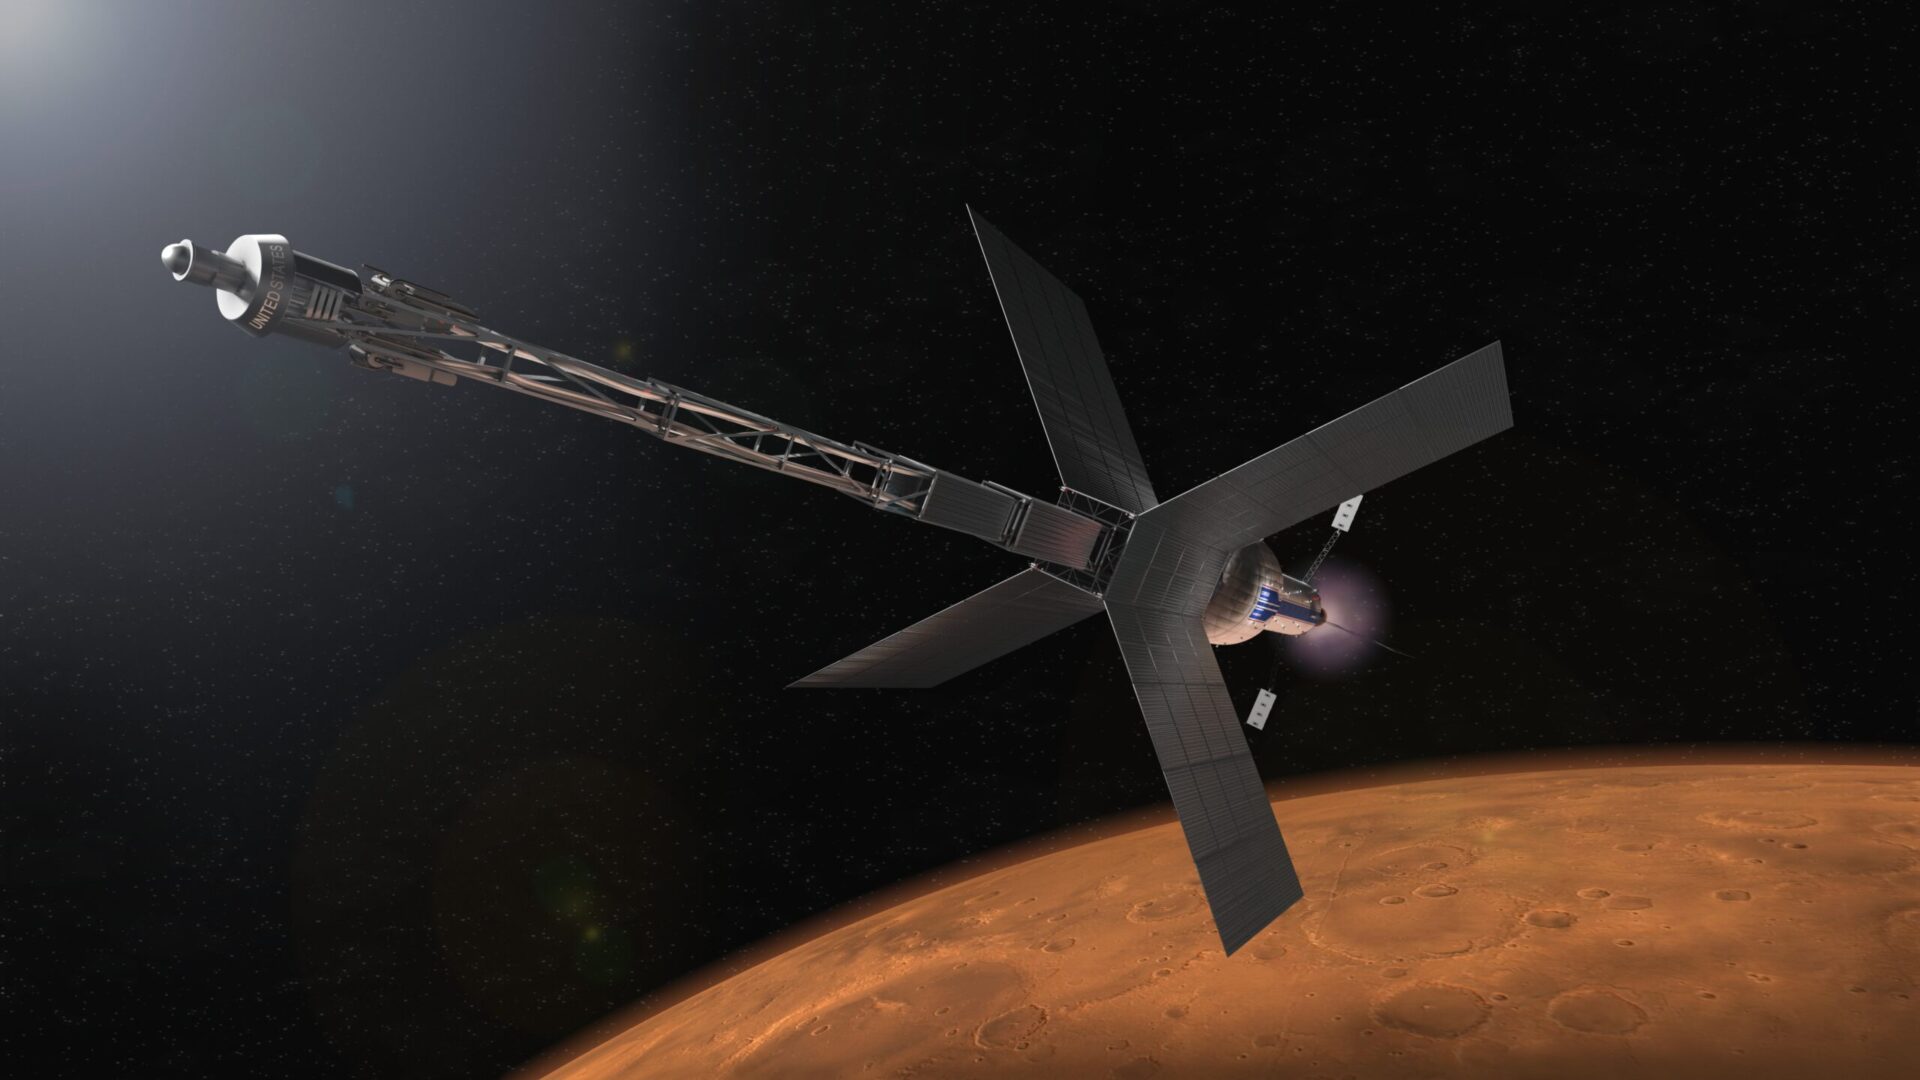 Illustration of a Mars transit habitat and nuclear propulsion system that could one day take astronauts to Mars.